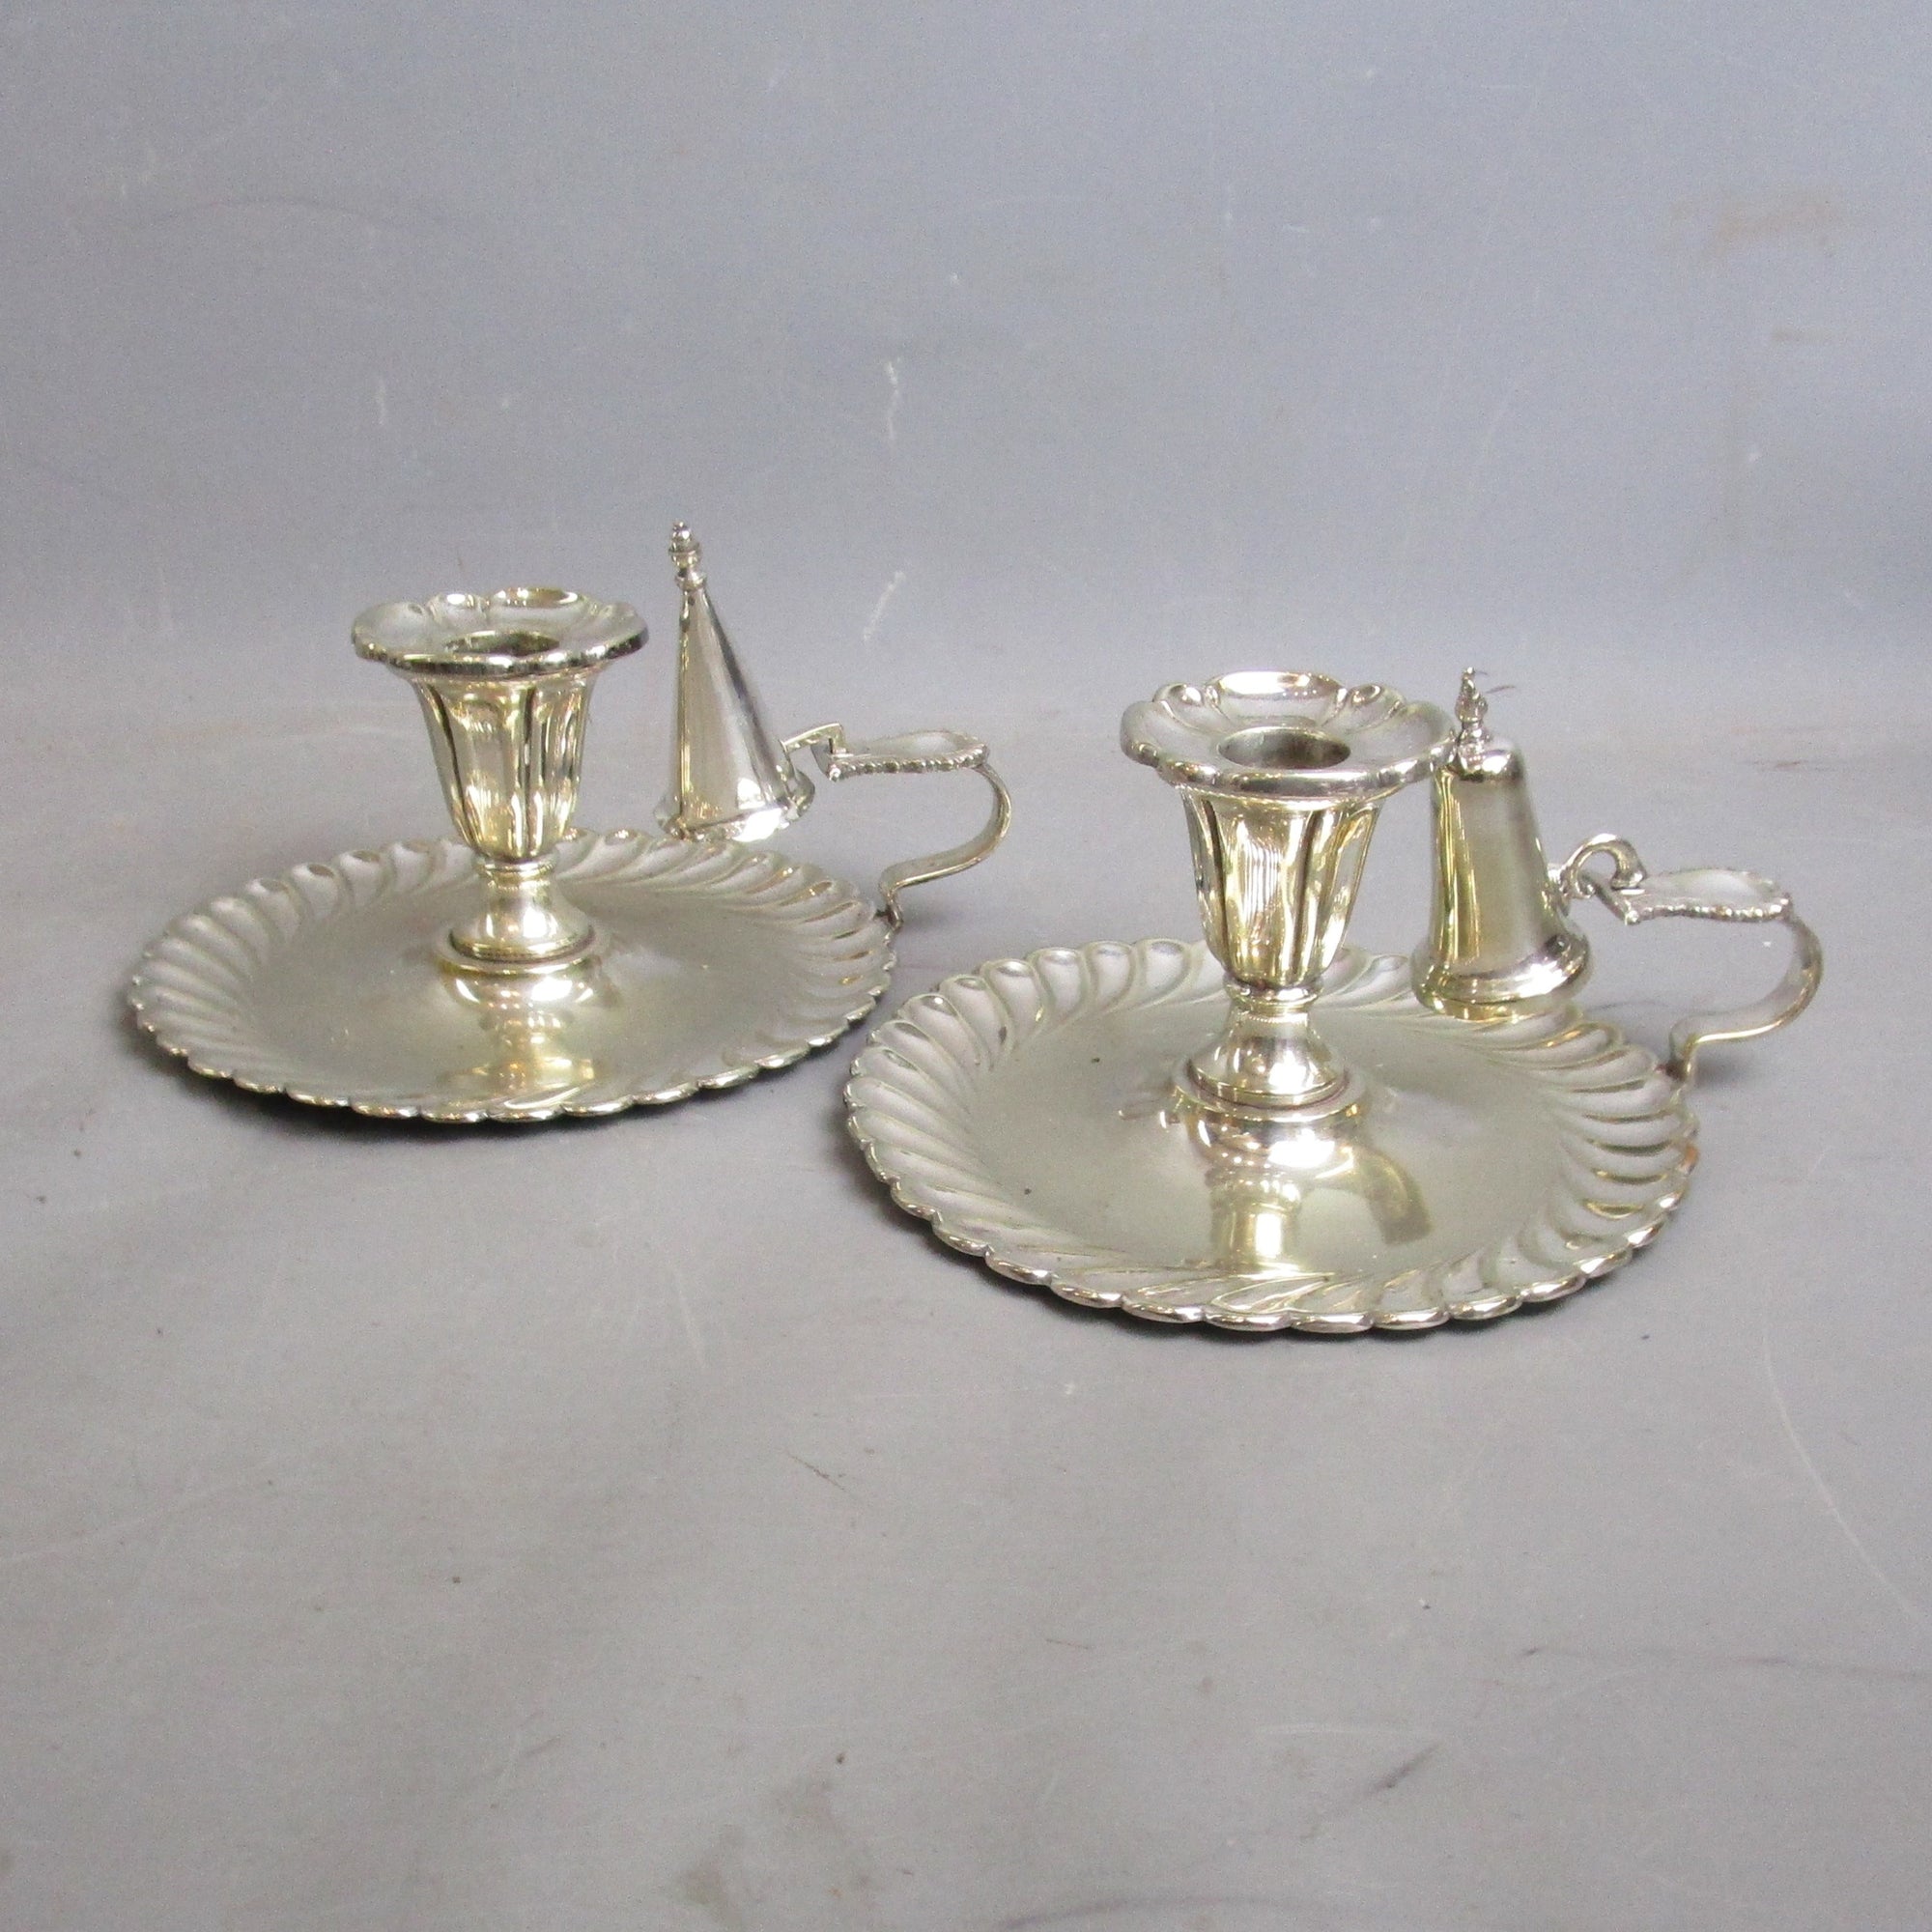 Matched Pair Of Silver Plate Chambersticks And Snuffers Antique Victorian c1900